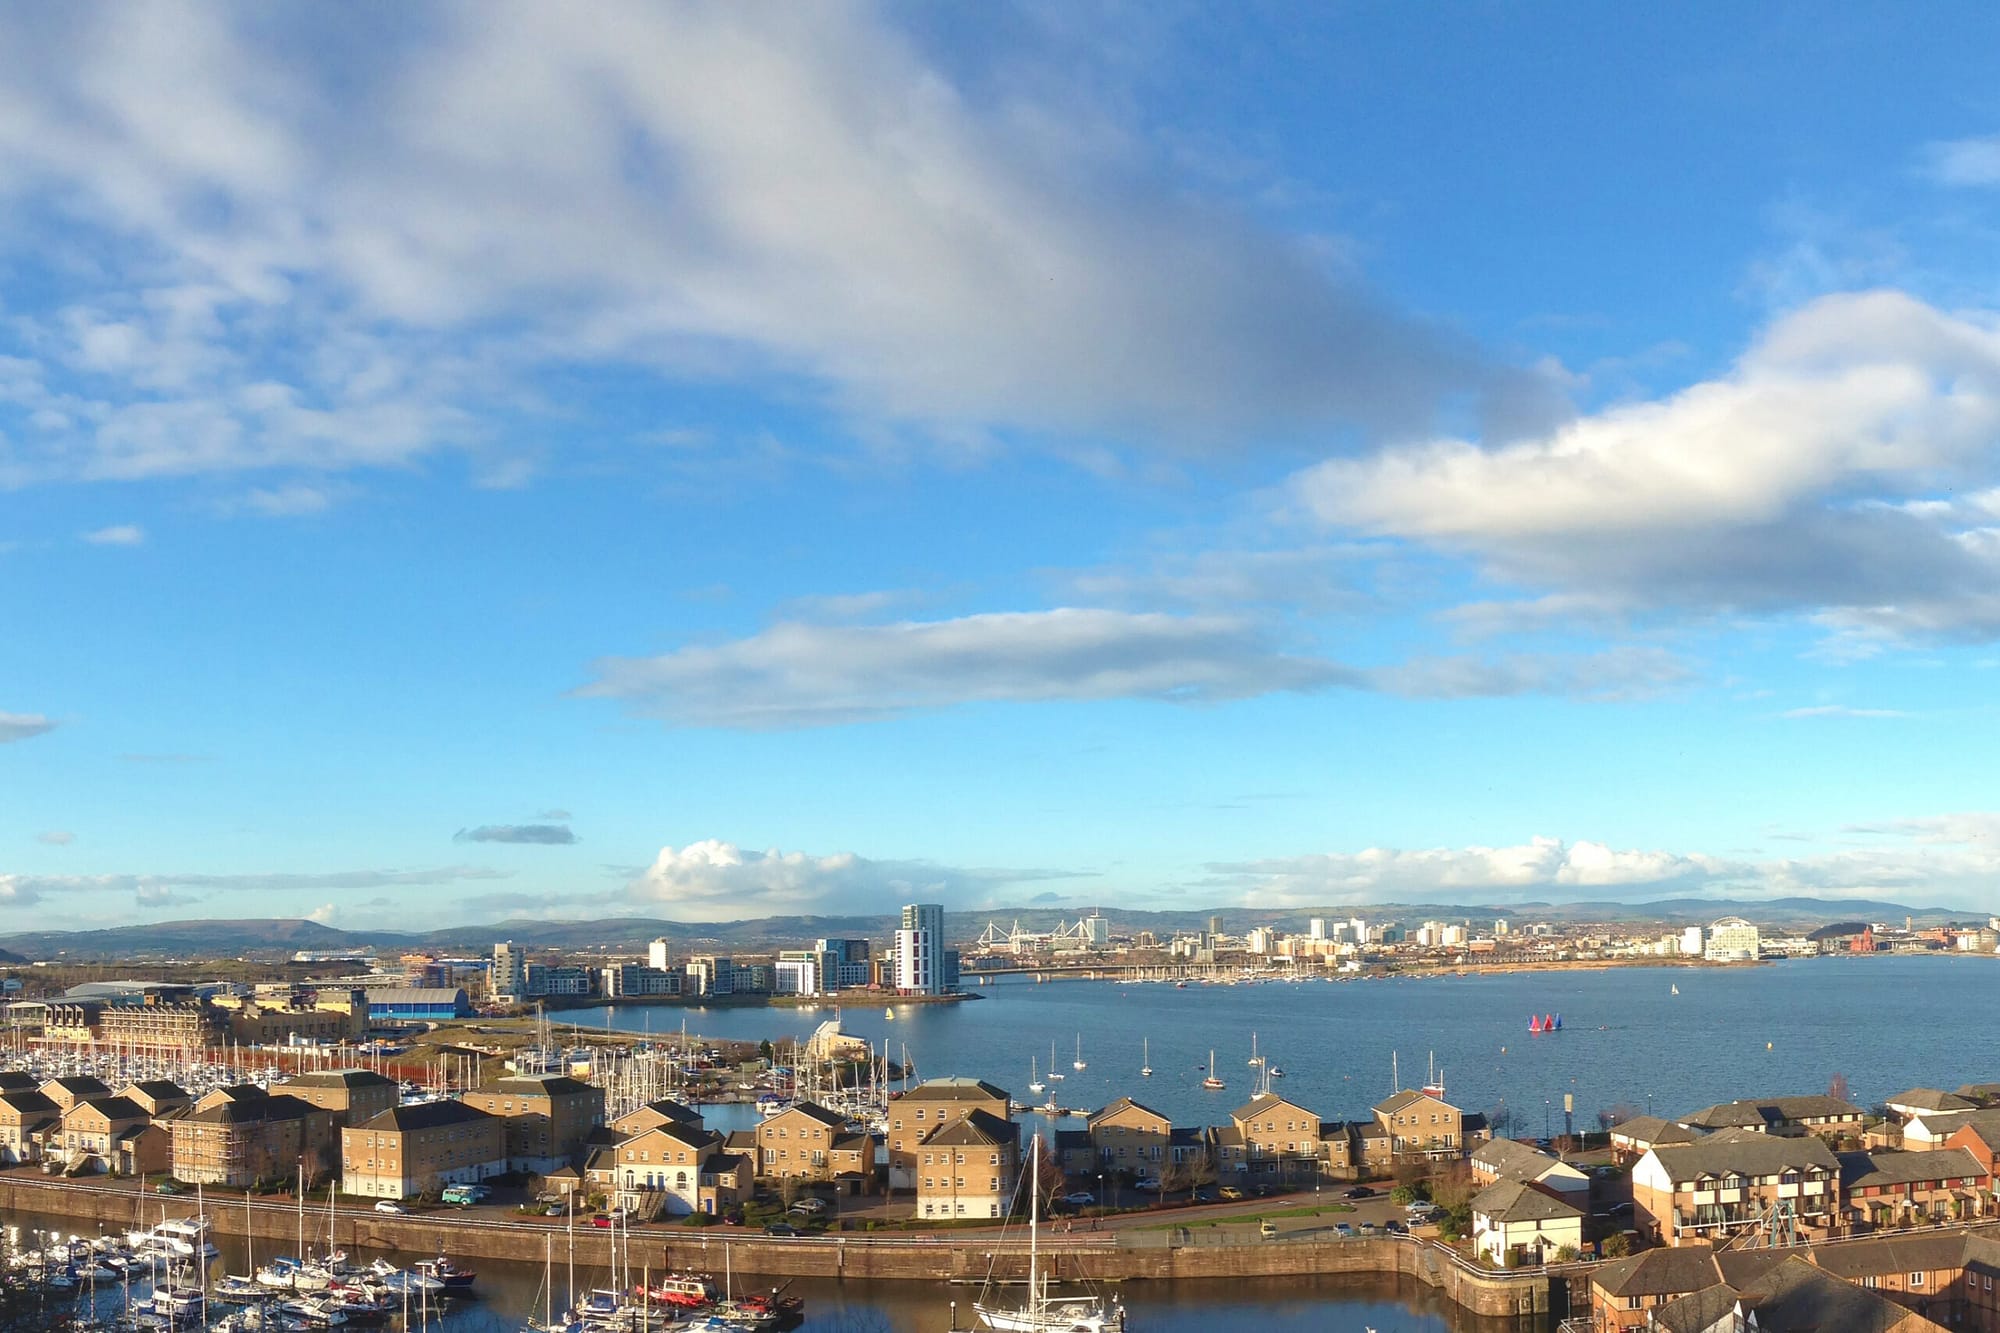 View of Cardiff Bay from Penarth